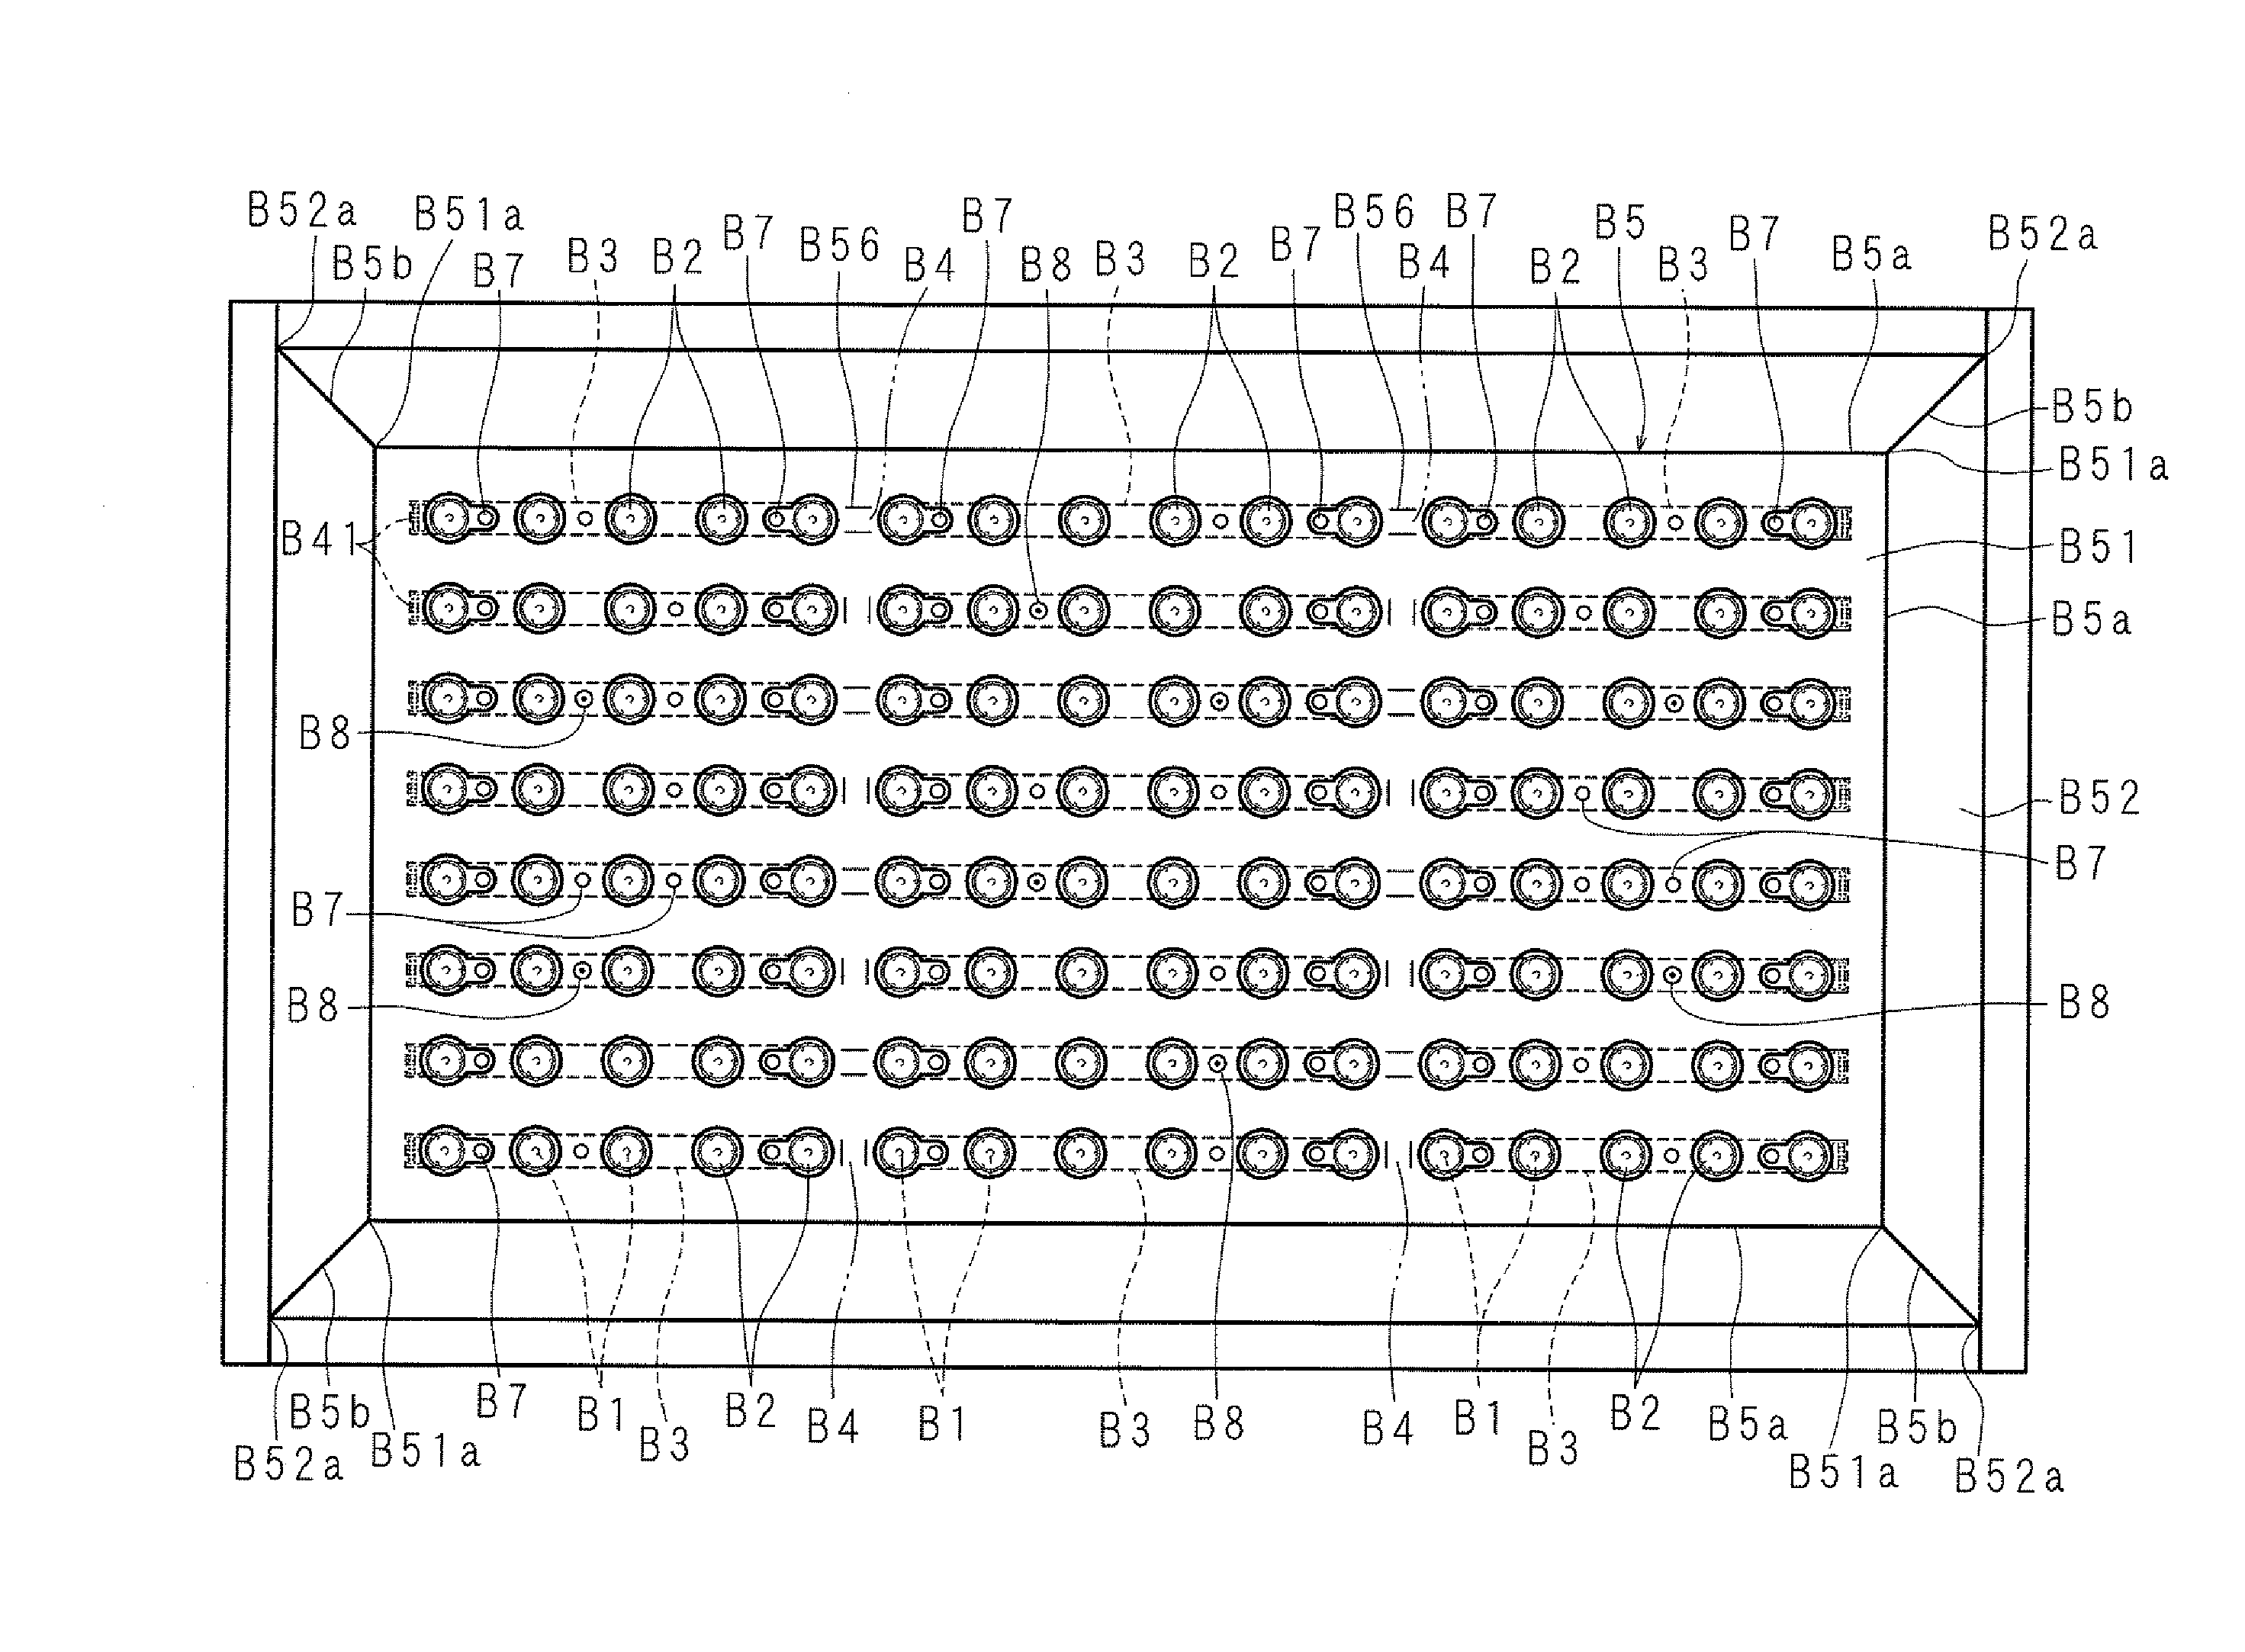 Light source device and diplay device